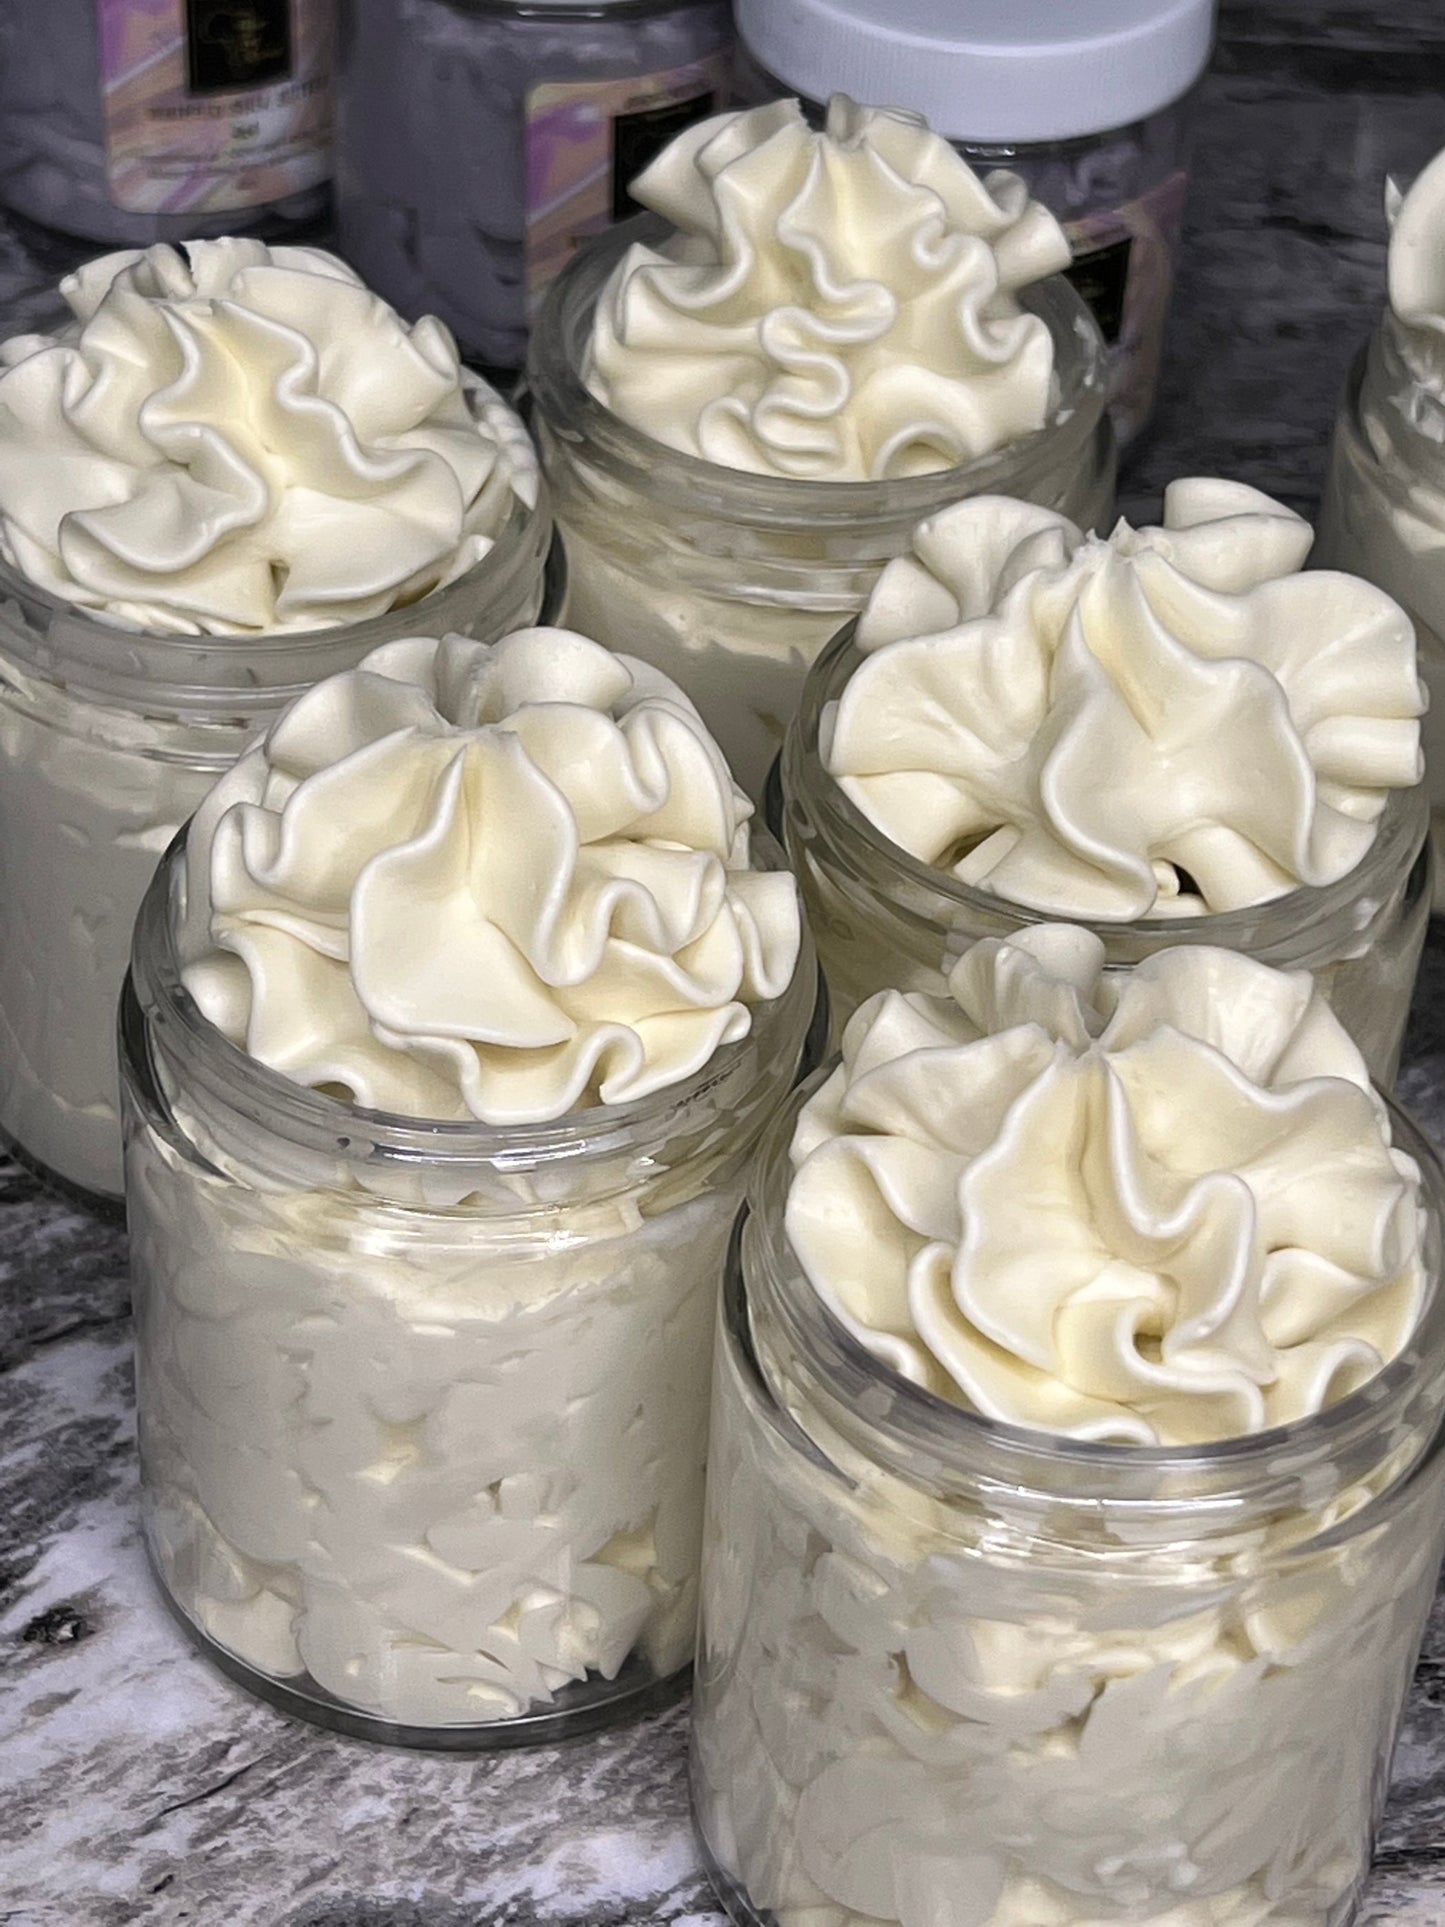 Original Scented Whipped Shea Butter